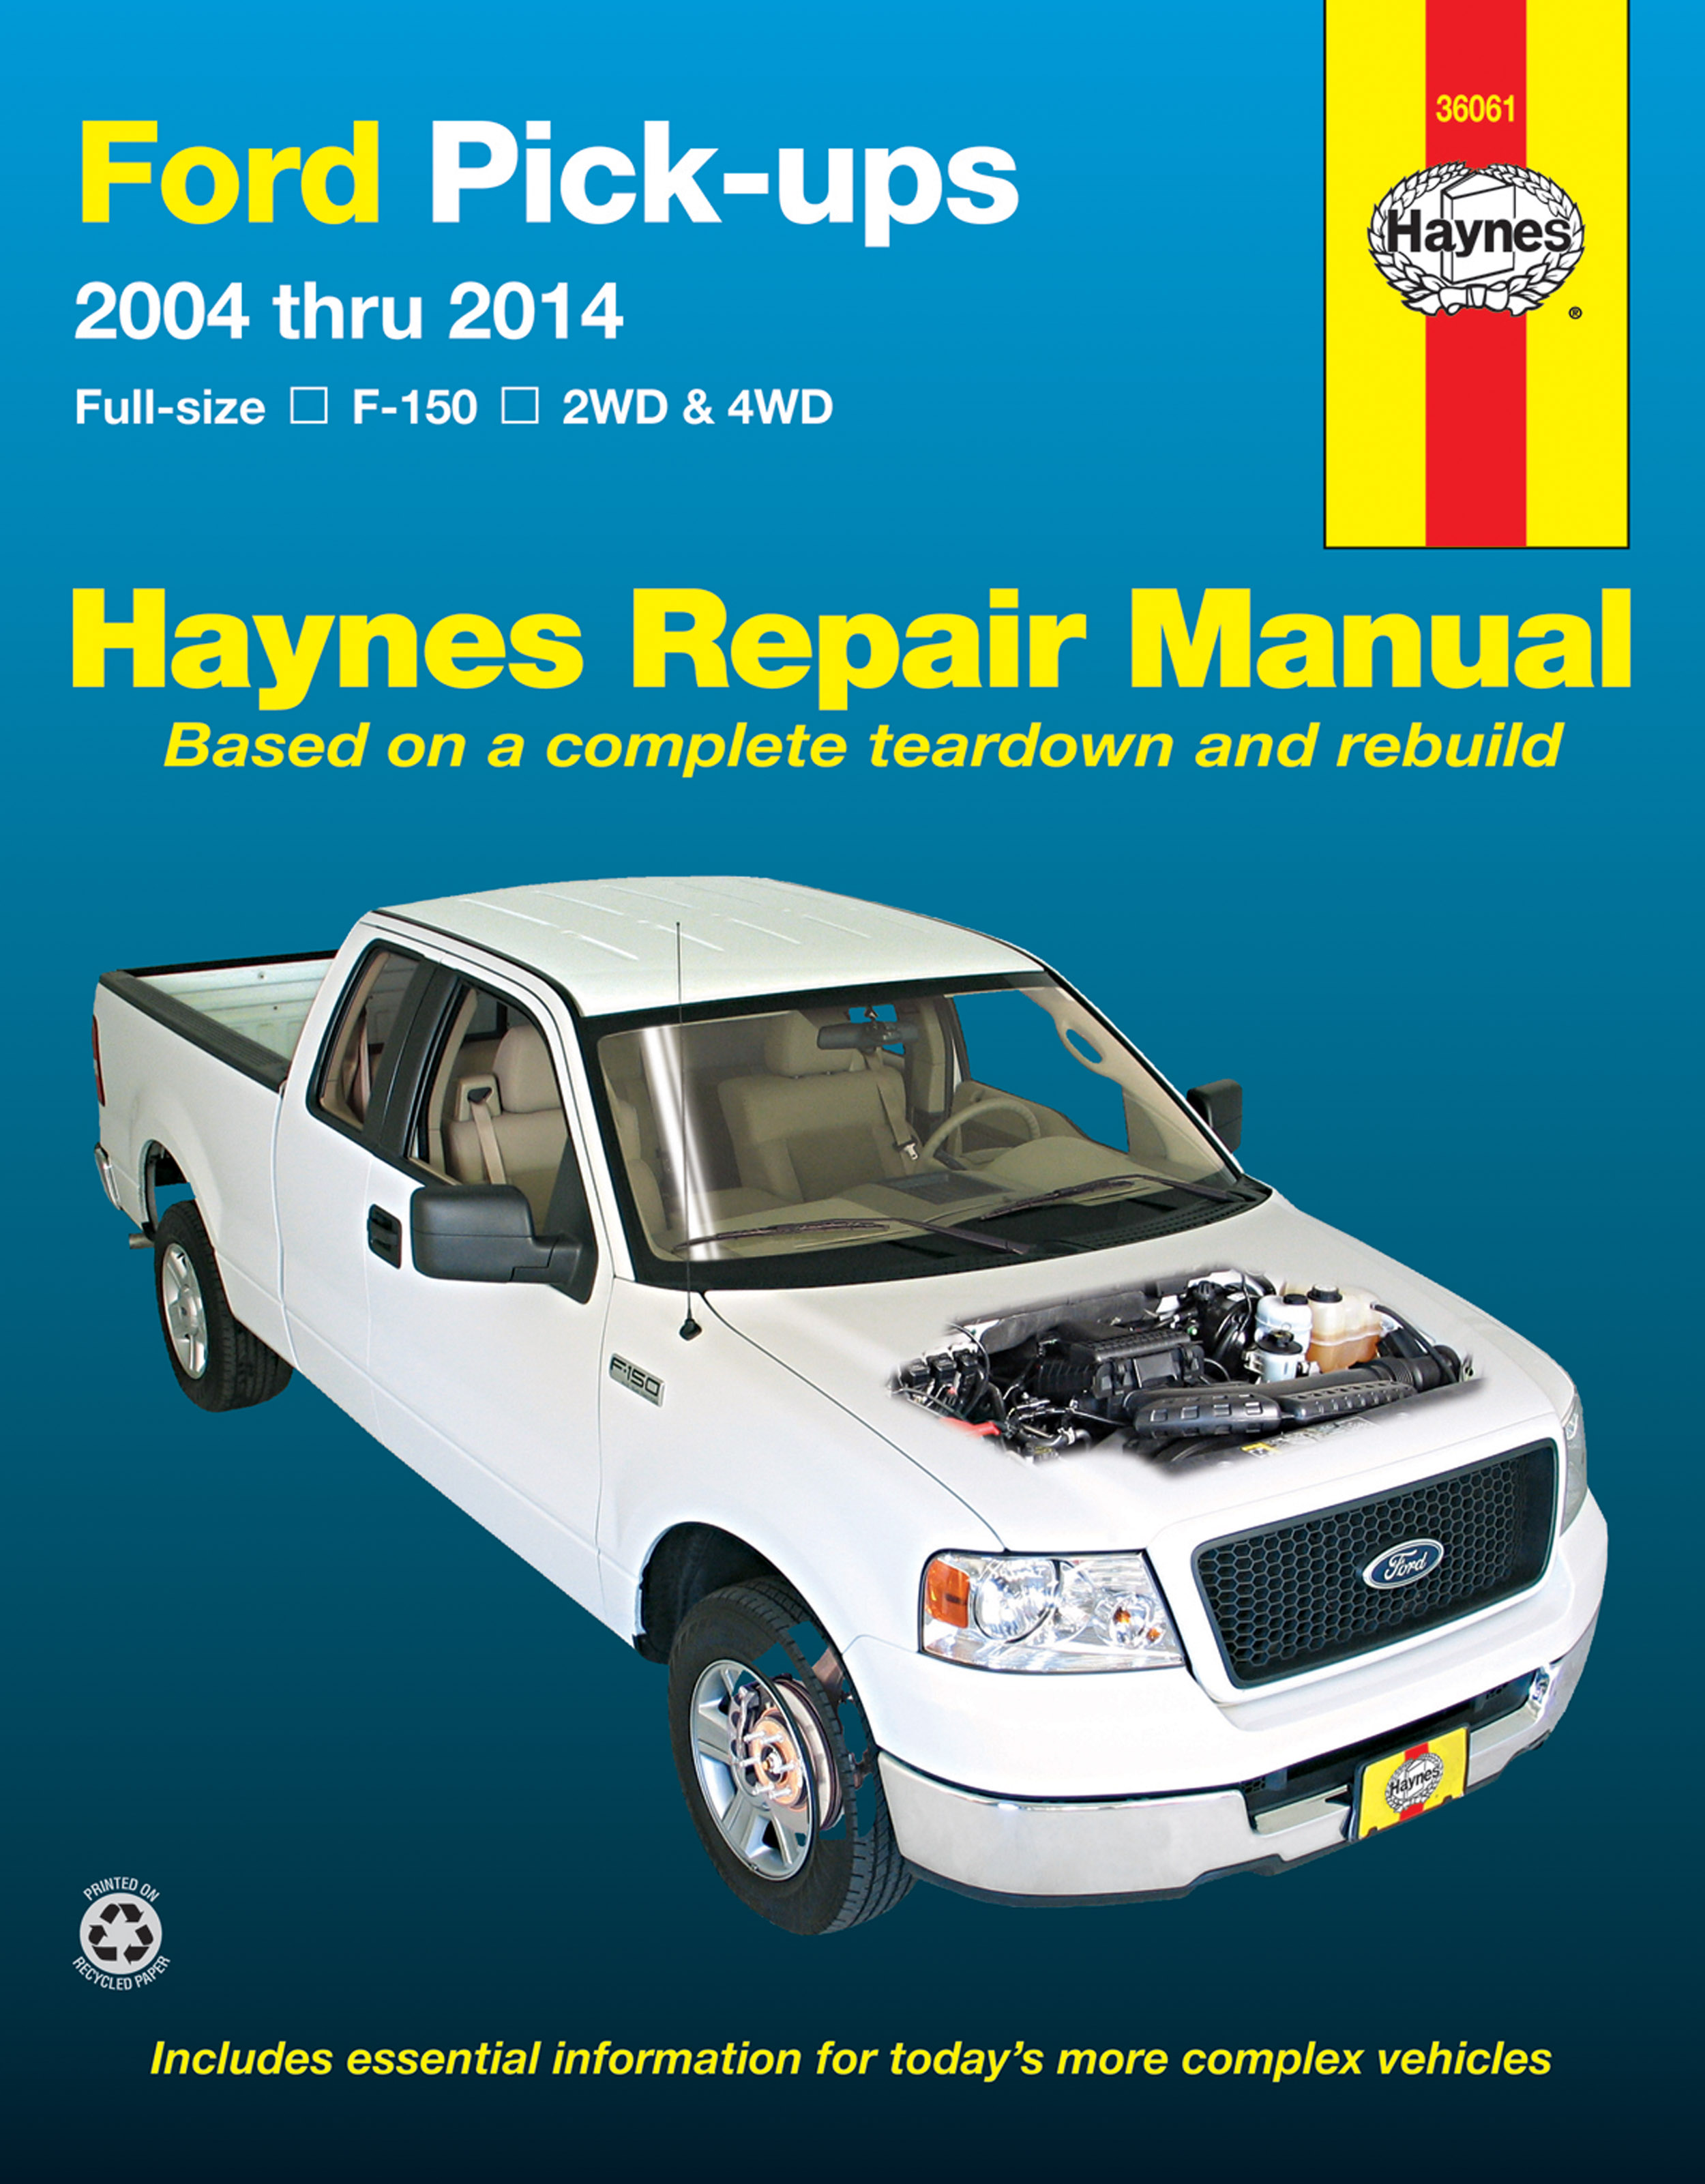 # OFFICIAL WORKSHOP MANUAL service repair FOR FORD F-150 F150 2004-2008 Wiring 